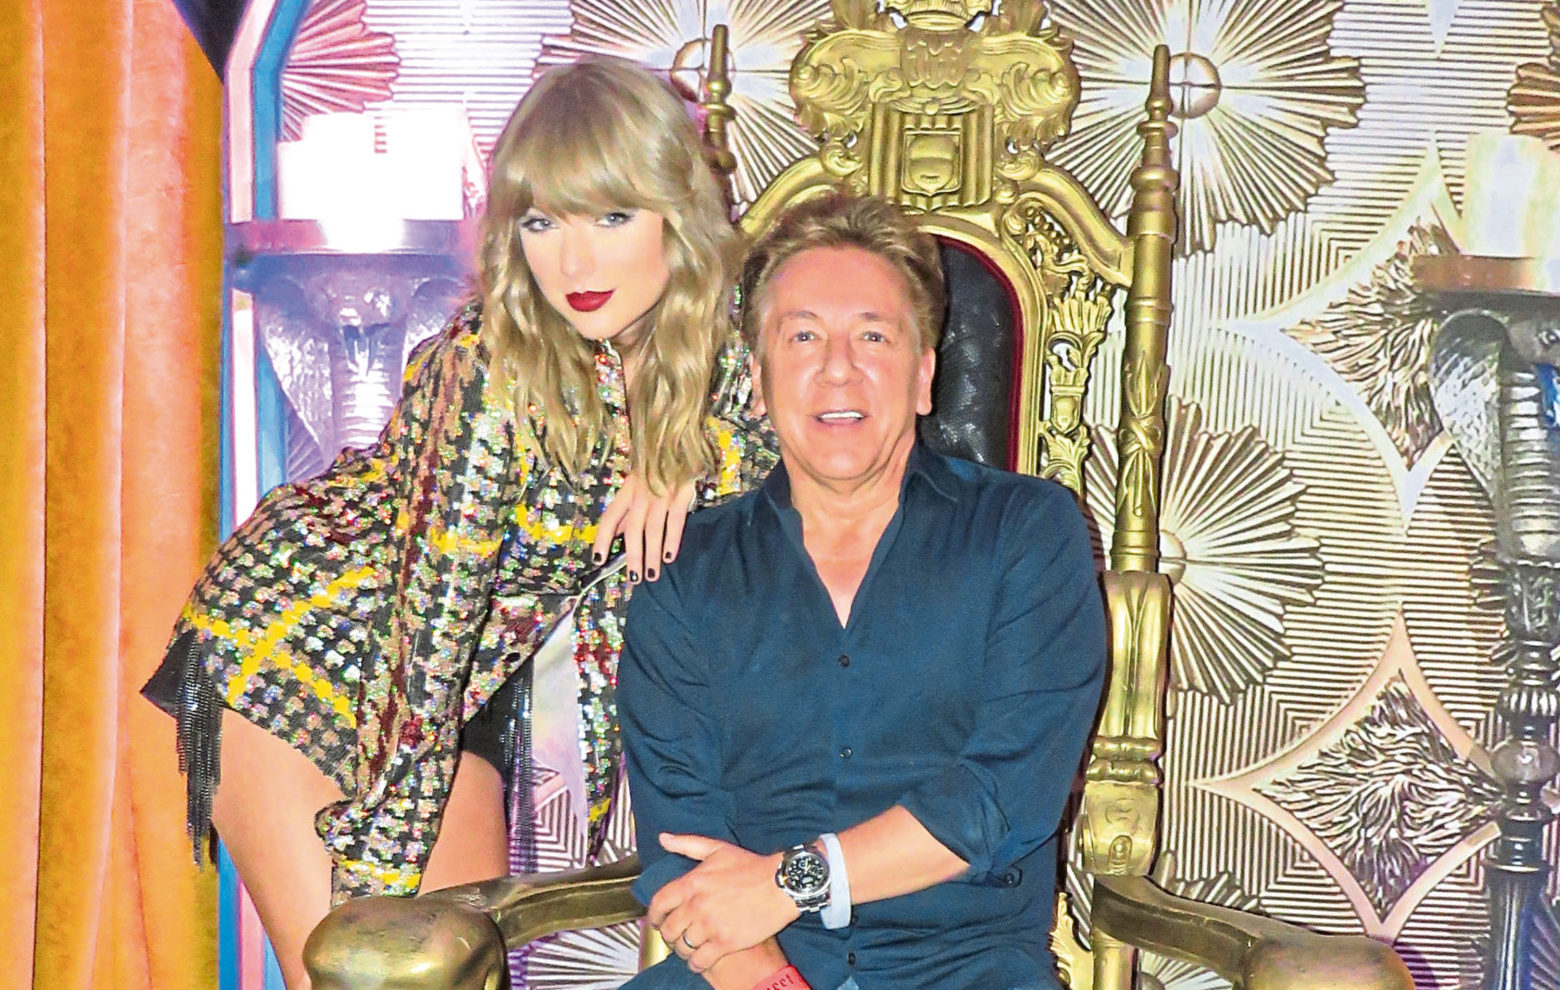 Game Of Thrones? Singing superstar Taylor Swift and I prove we’re showbiz royalty